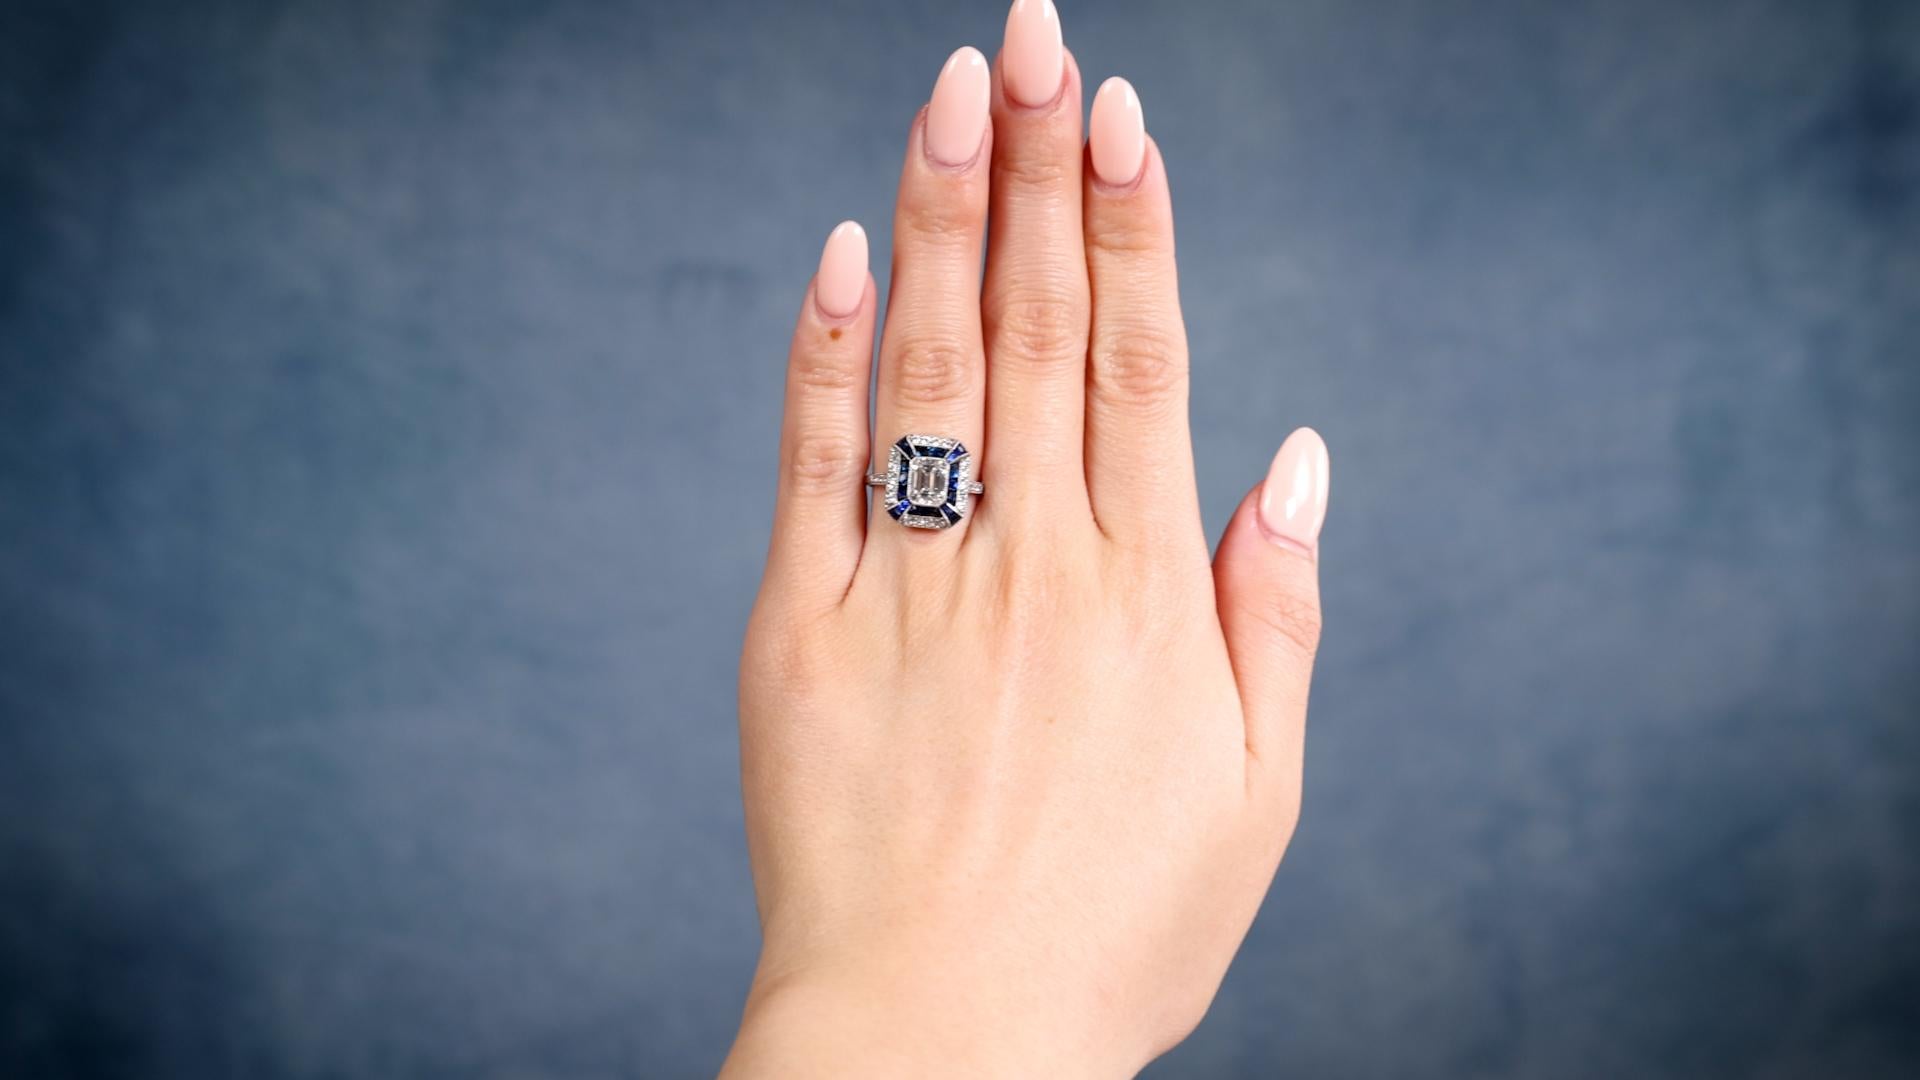 One Art Deco Inspired 1.06 Carat Emerald Cut Diamond Sapphire Platinum Ring. Featuring one emerald cut diamond of 1.06 carats, graded F color, VS1 clarity. Accented by 18 French cut sapphires with a total weight of approximately 1.20 carats, and 24